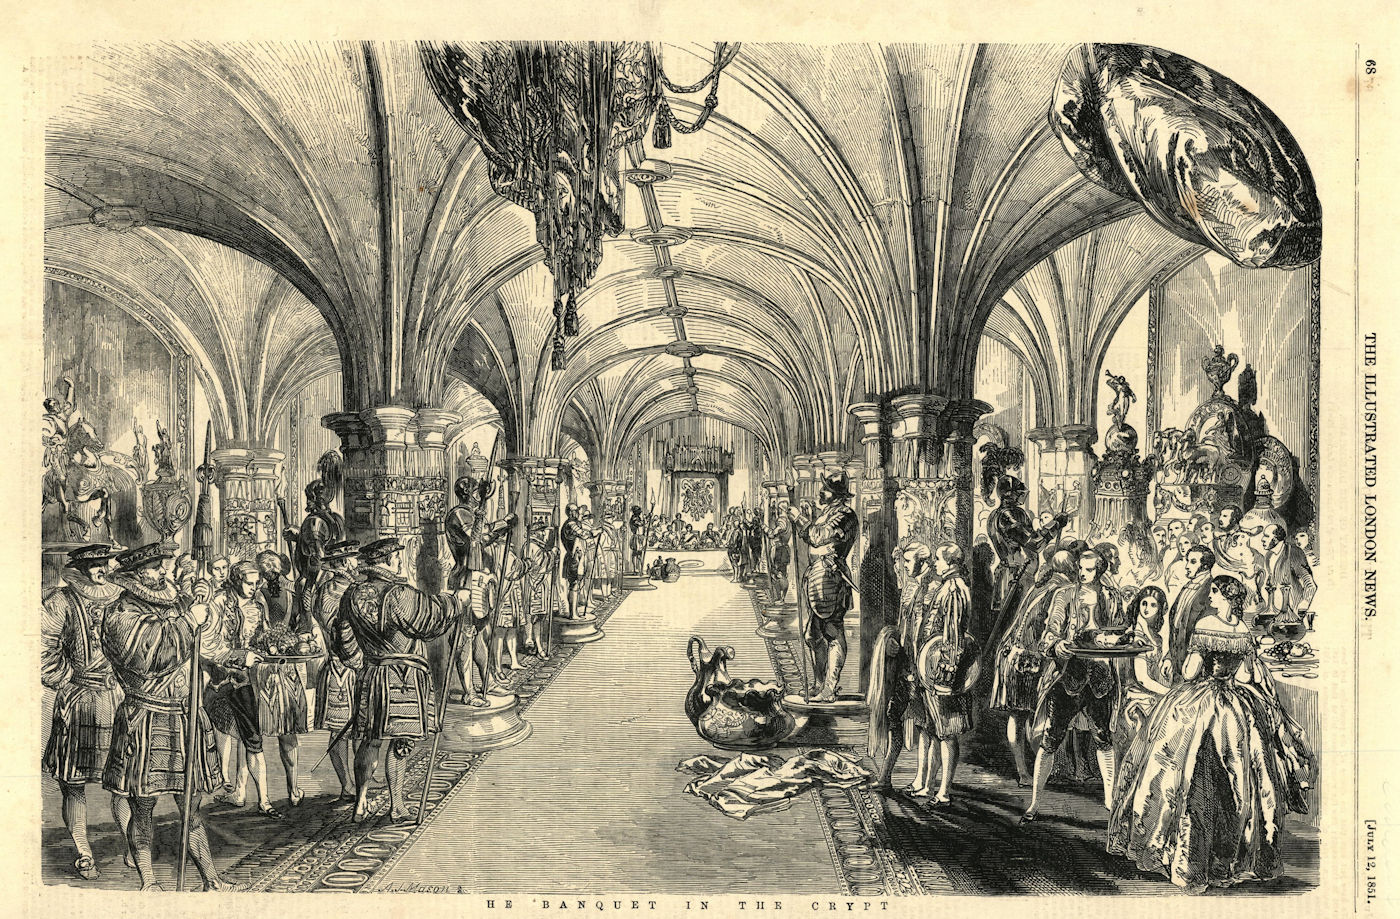 Associate Product The banquet in the crypt. Society. Churches 1851 old antique print picture